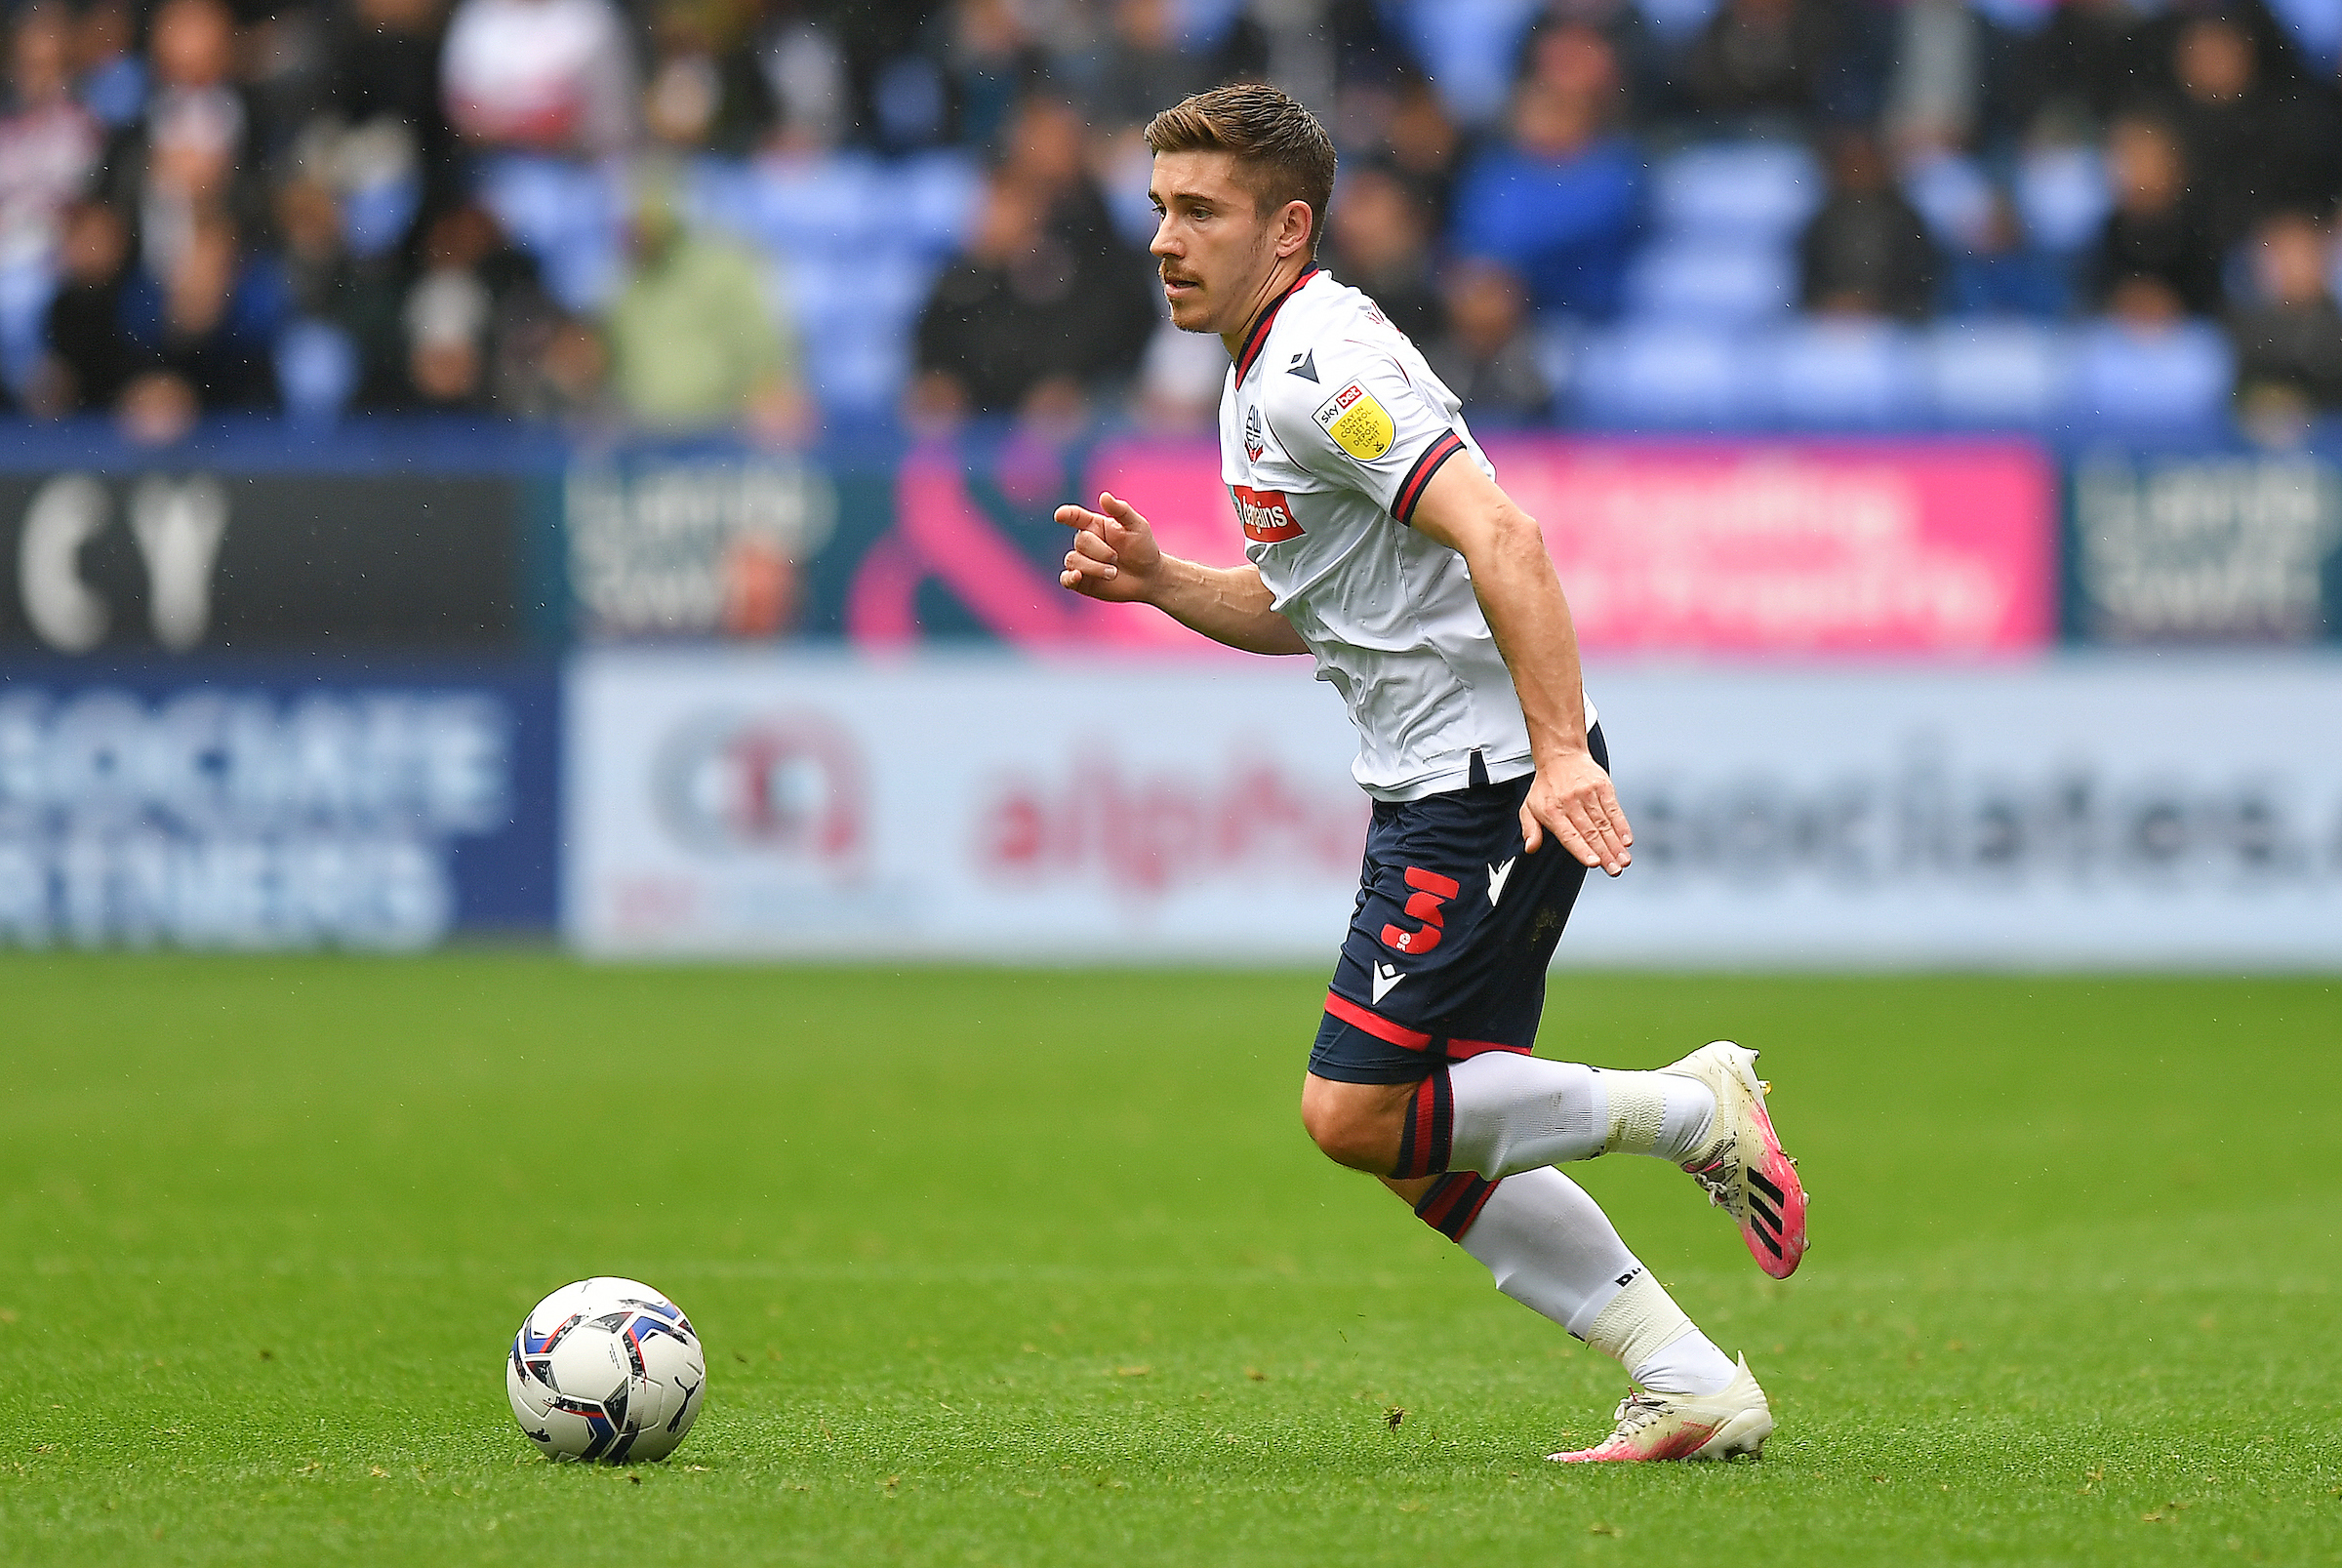 Former Wales defender Declan John on finding stability at Bolton Wanderers